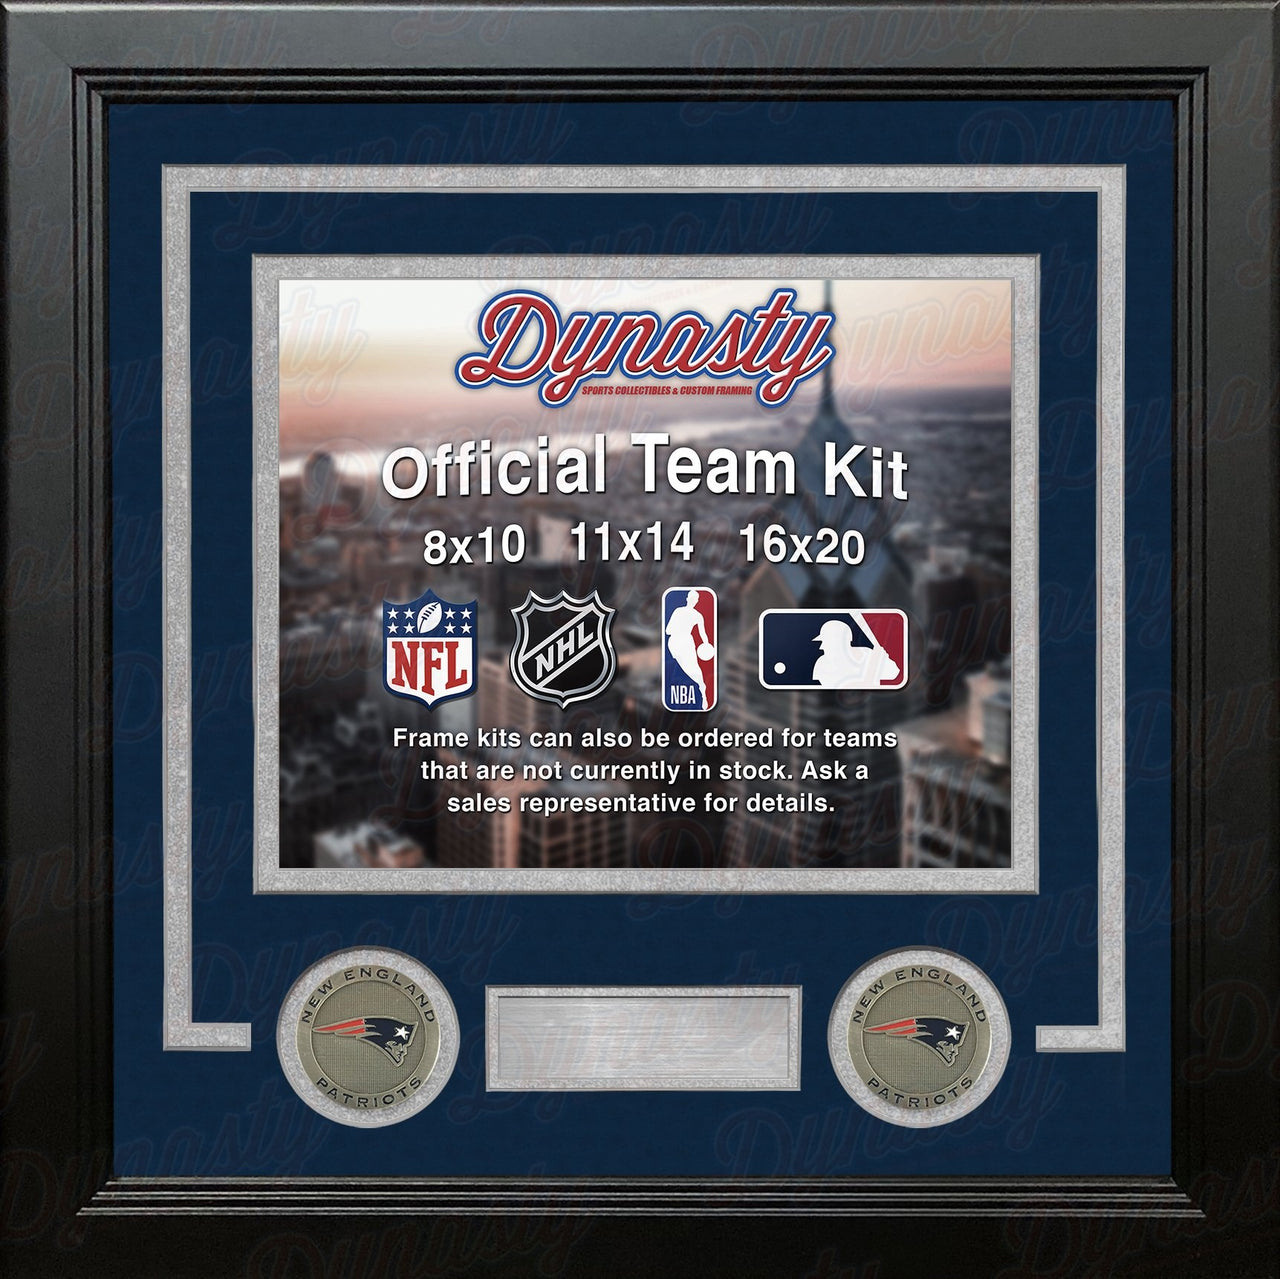 New England Patriots Custom NFL Football 8x10 Picture Frame Kit (Multiple Colors) - Dynasty Sports & Framing 